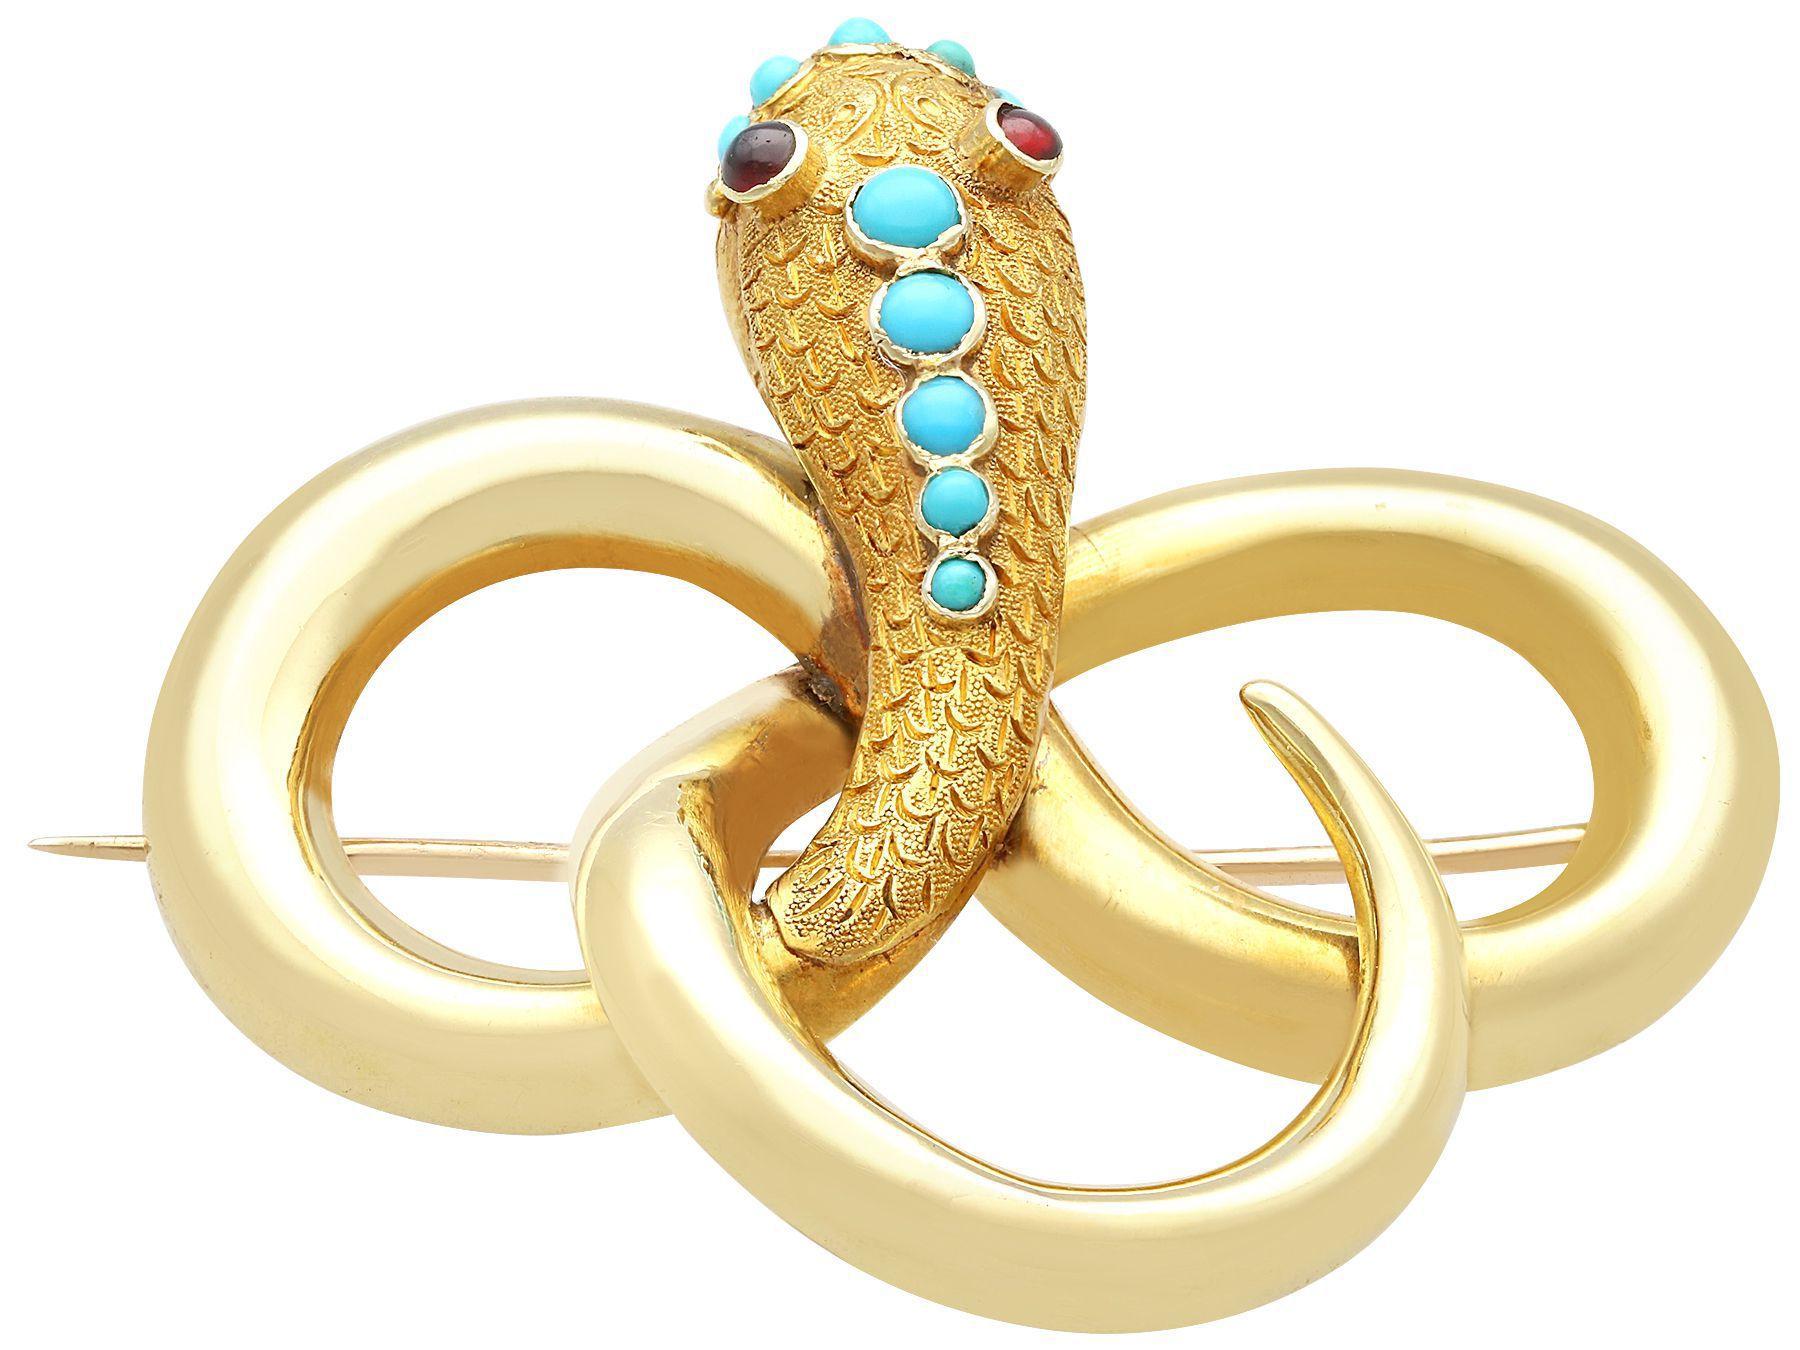 Cabochon Antique 0.37 Carat Turquoise and Garnet Yellow Gold Snake Brooch For Sale